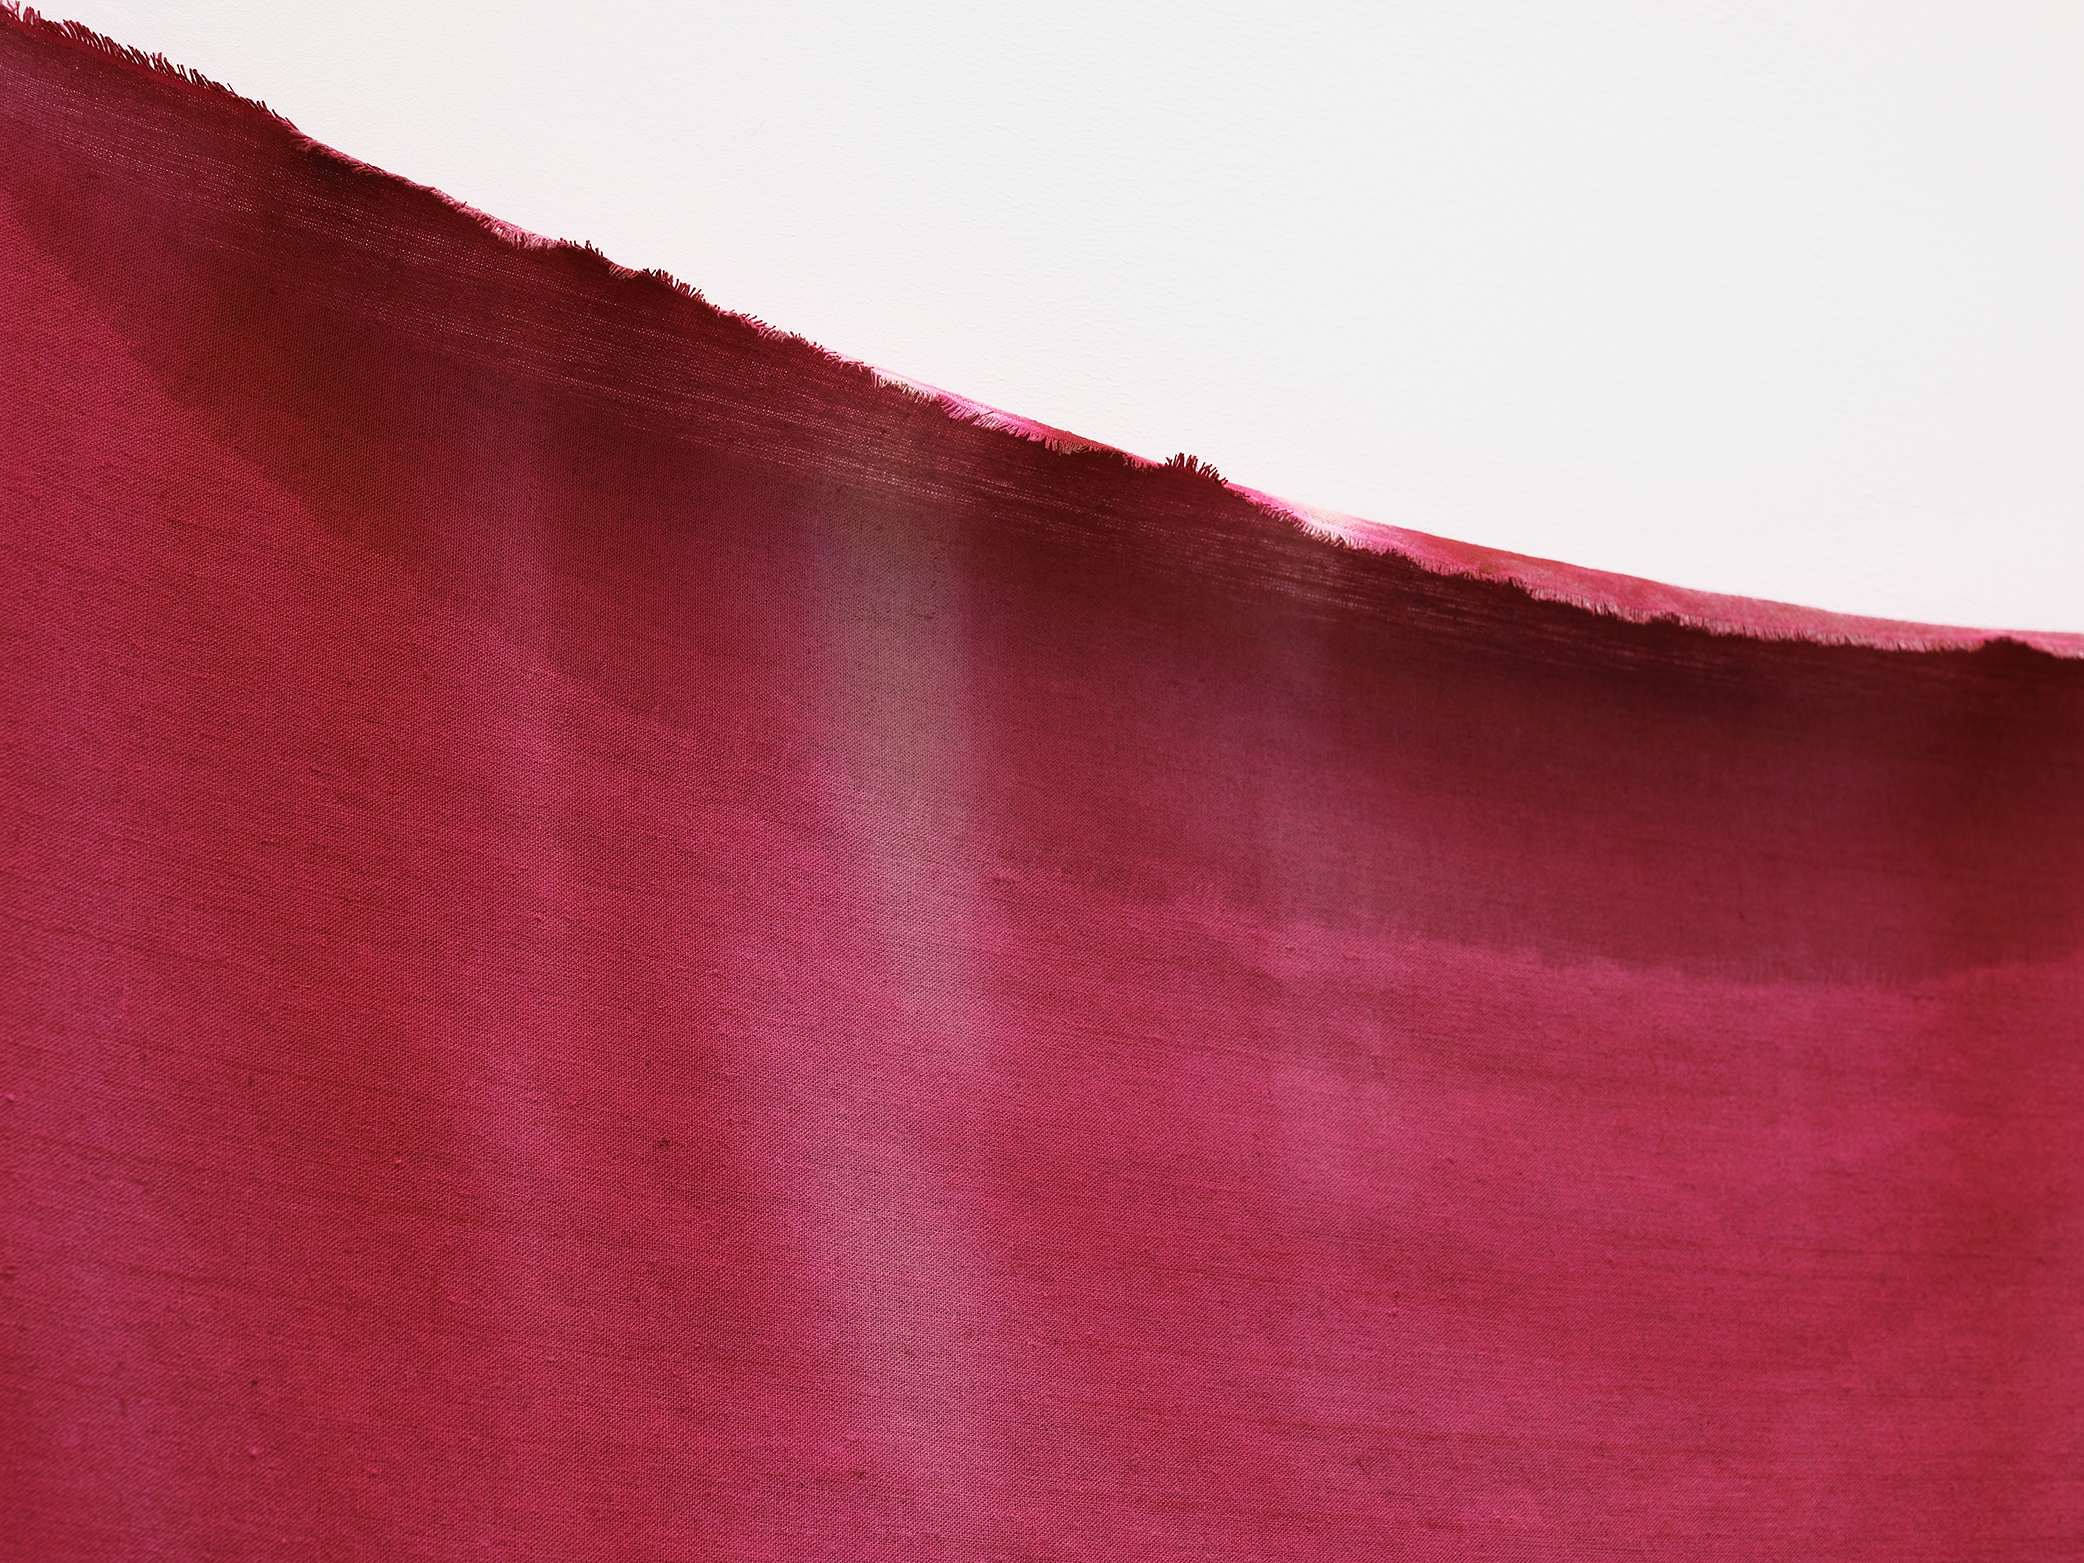 Abbas Akhavan, curtain (detail), 2021, water based pigment on linen, 95 x 101 in. (241 x 257 cm) by 